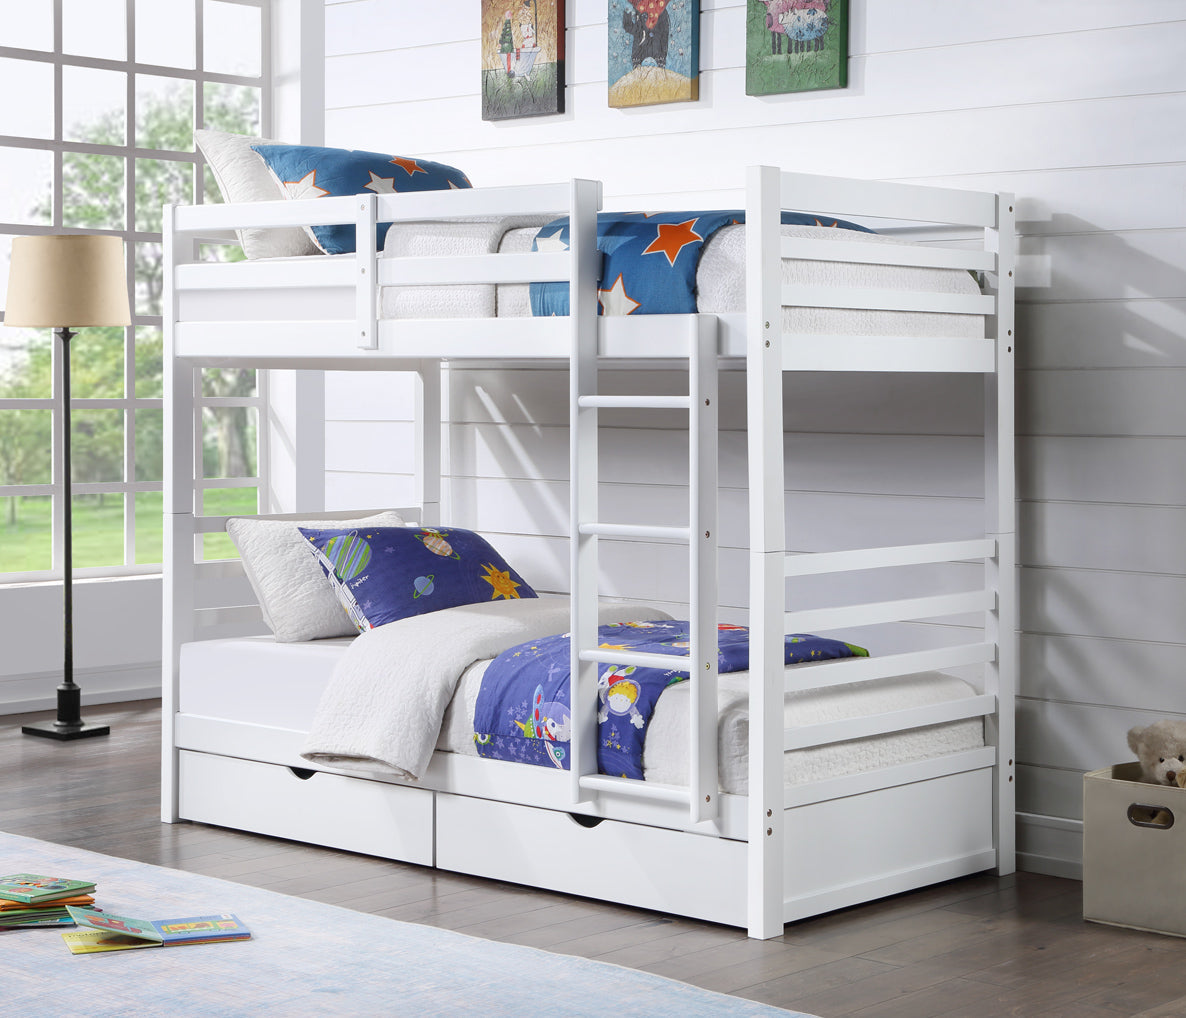 Oxford Single Bunk Bed Combo